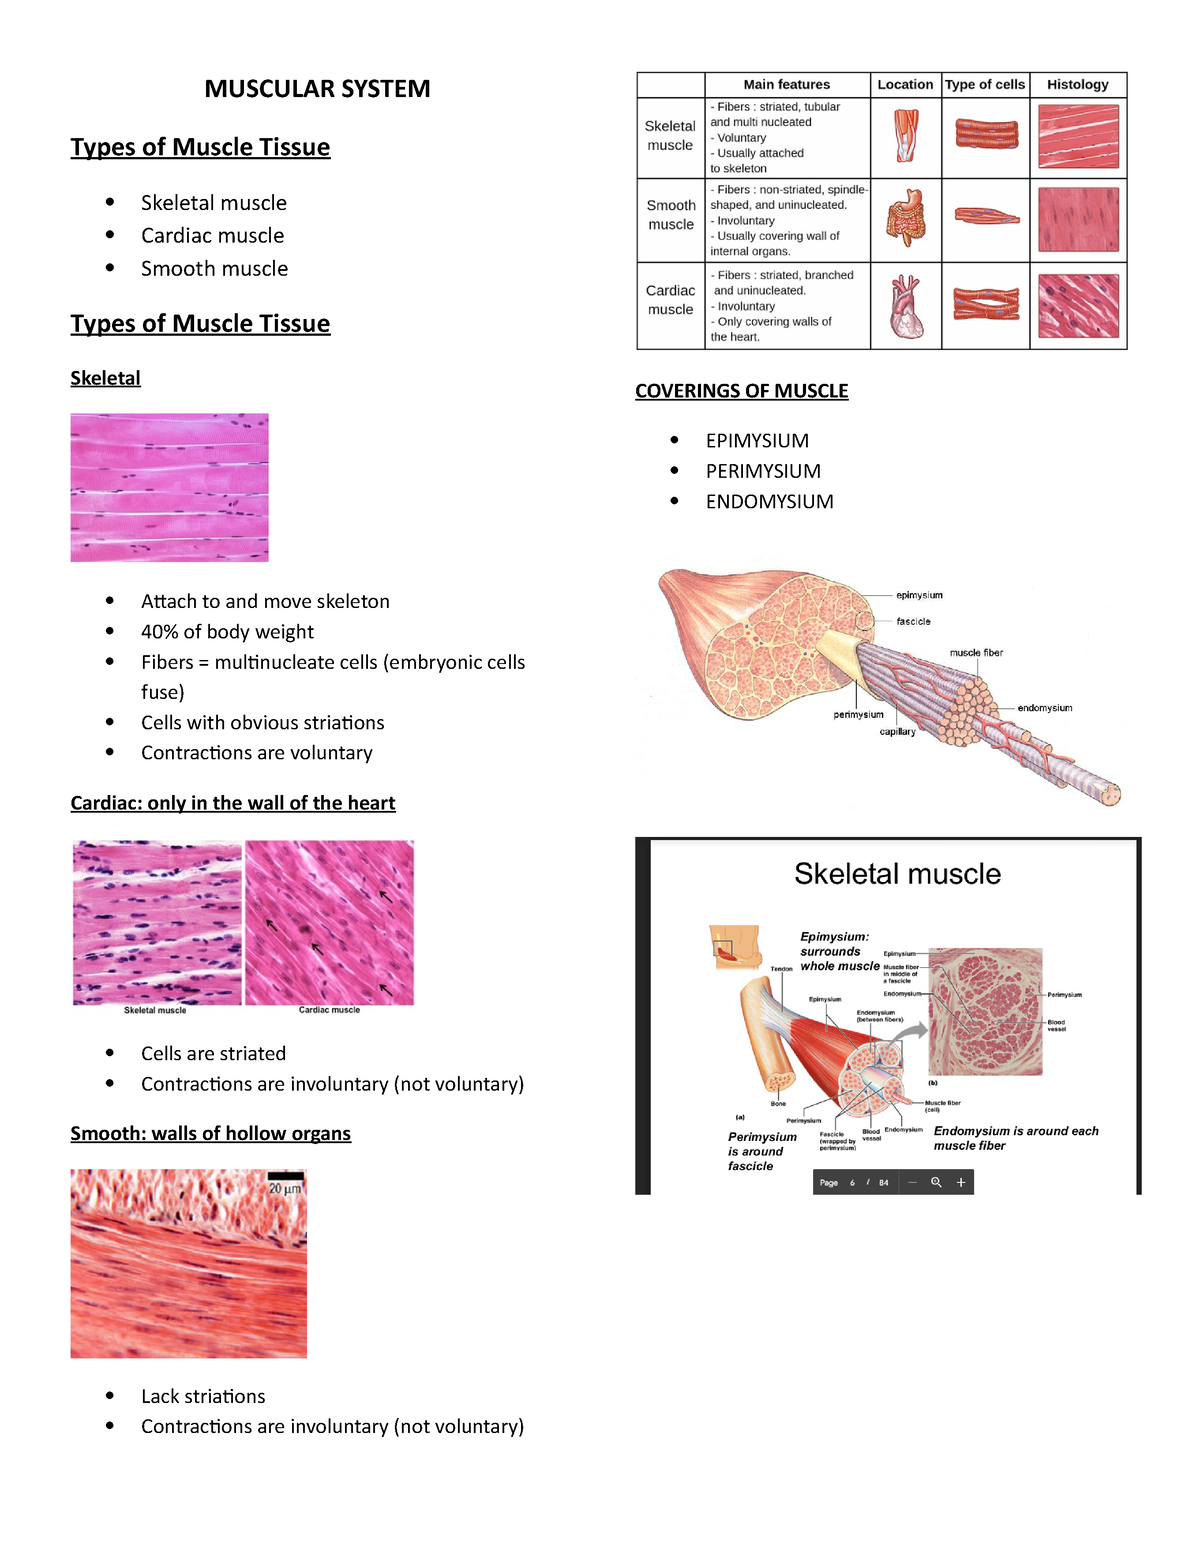 Muscular system - MUSCULAR SYSTEM Types of Muscle Tissue Skeletal ...